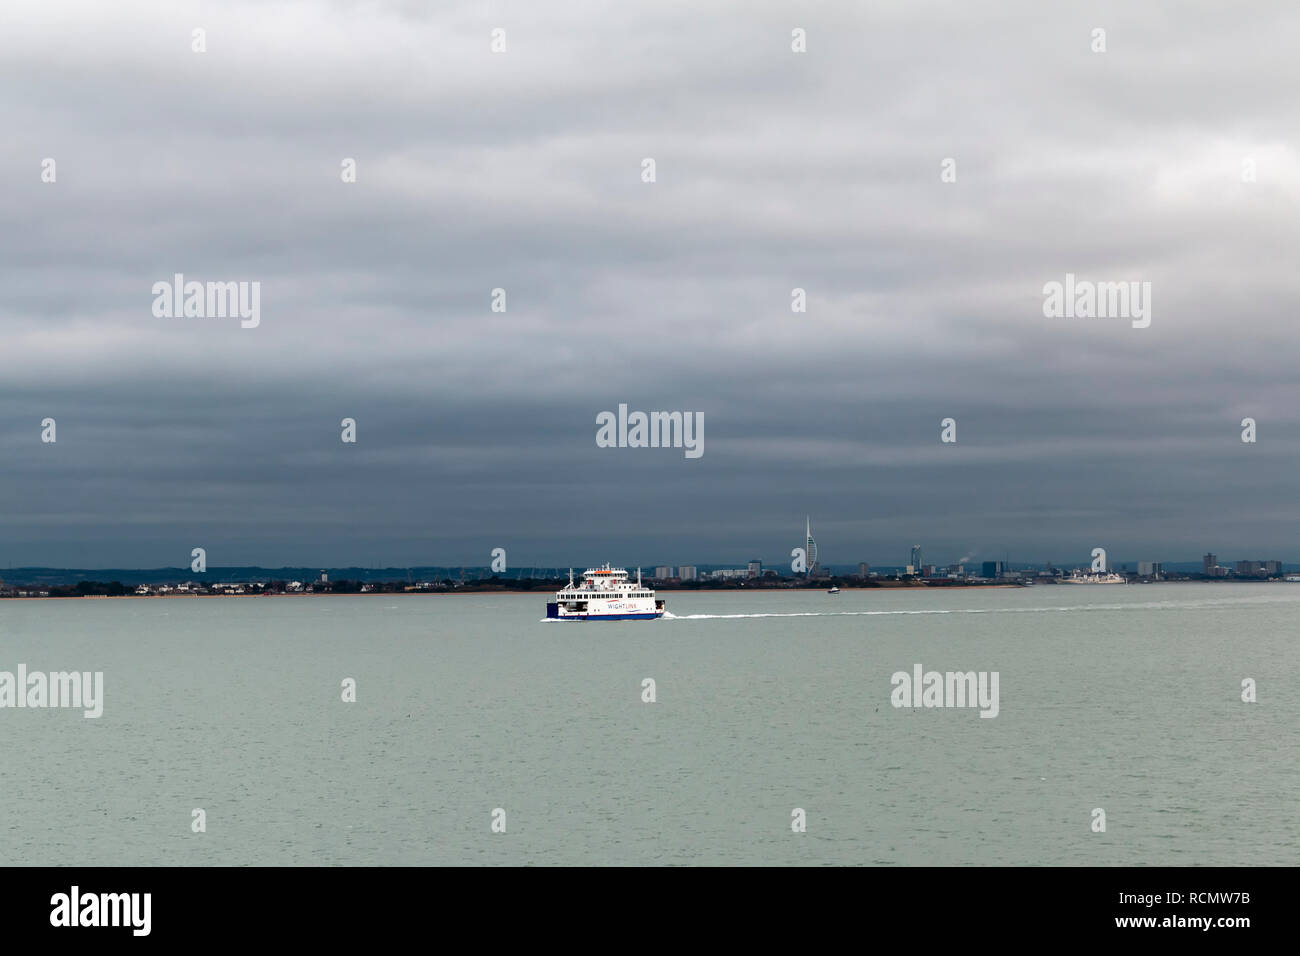 View looking towards Portsmouth from the Solent, showing the spinnaker tower. Stock Photo